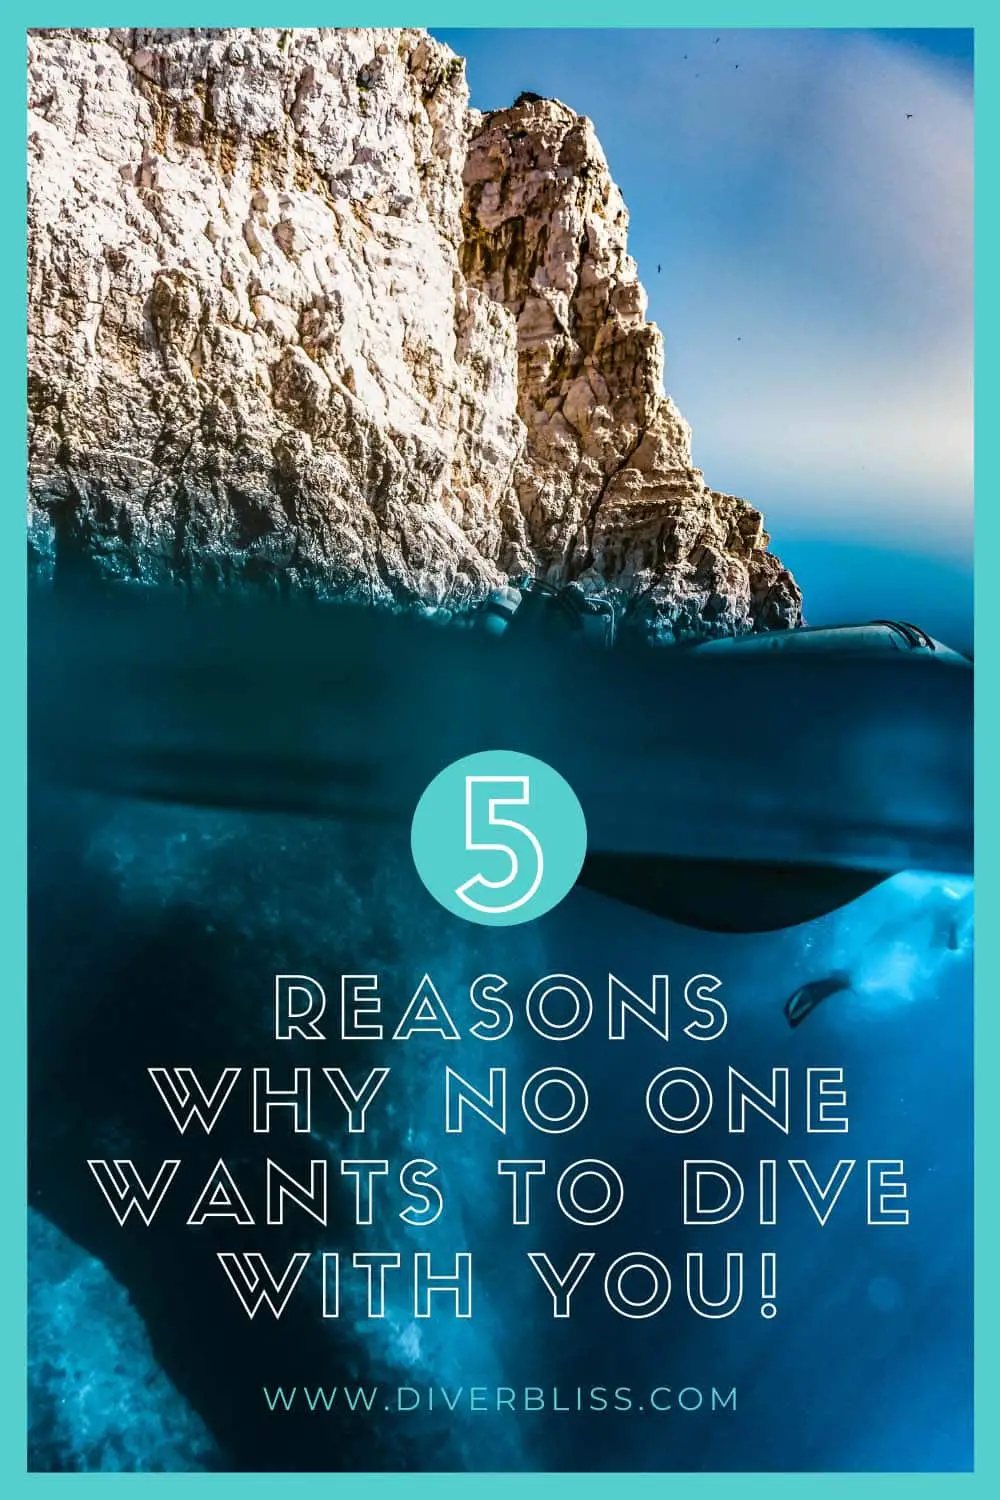 bad diver behavior underwater: 5 reasons why no one wants to dive with you